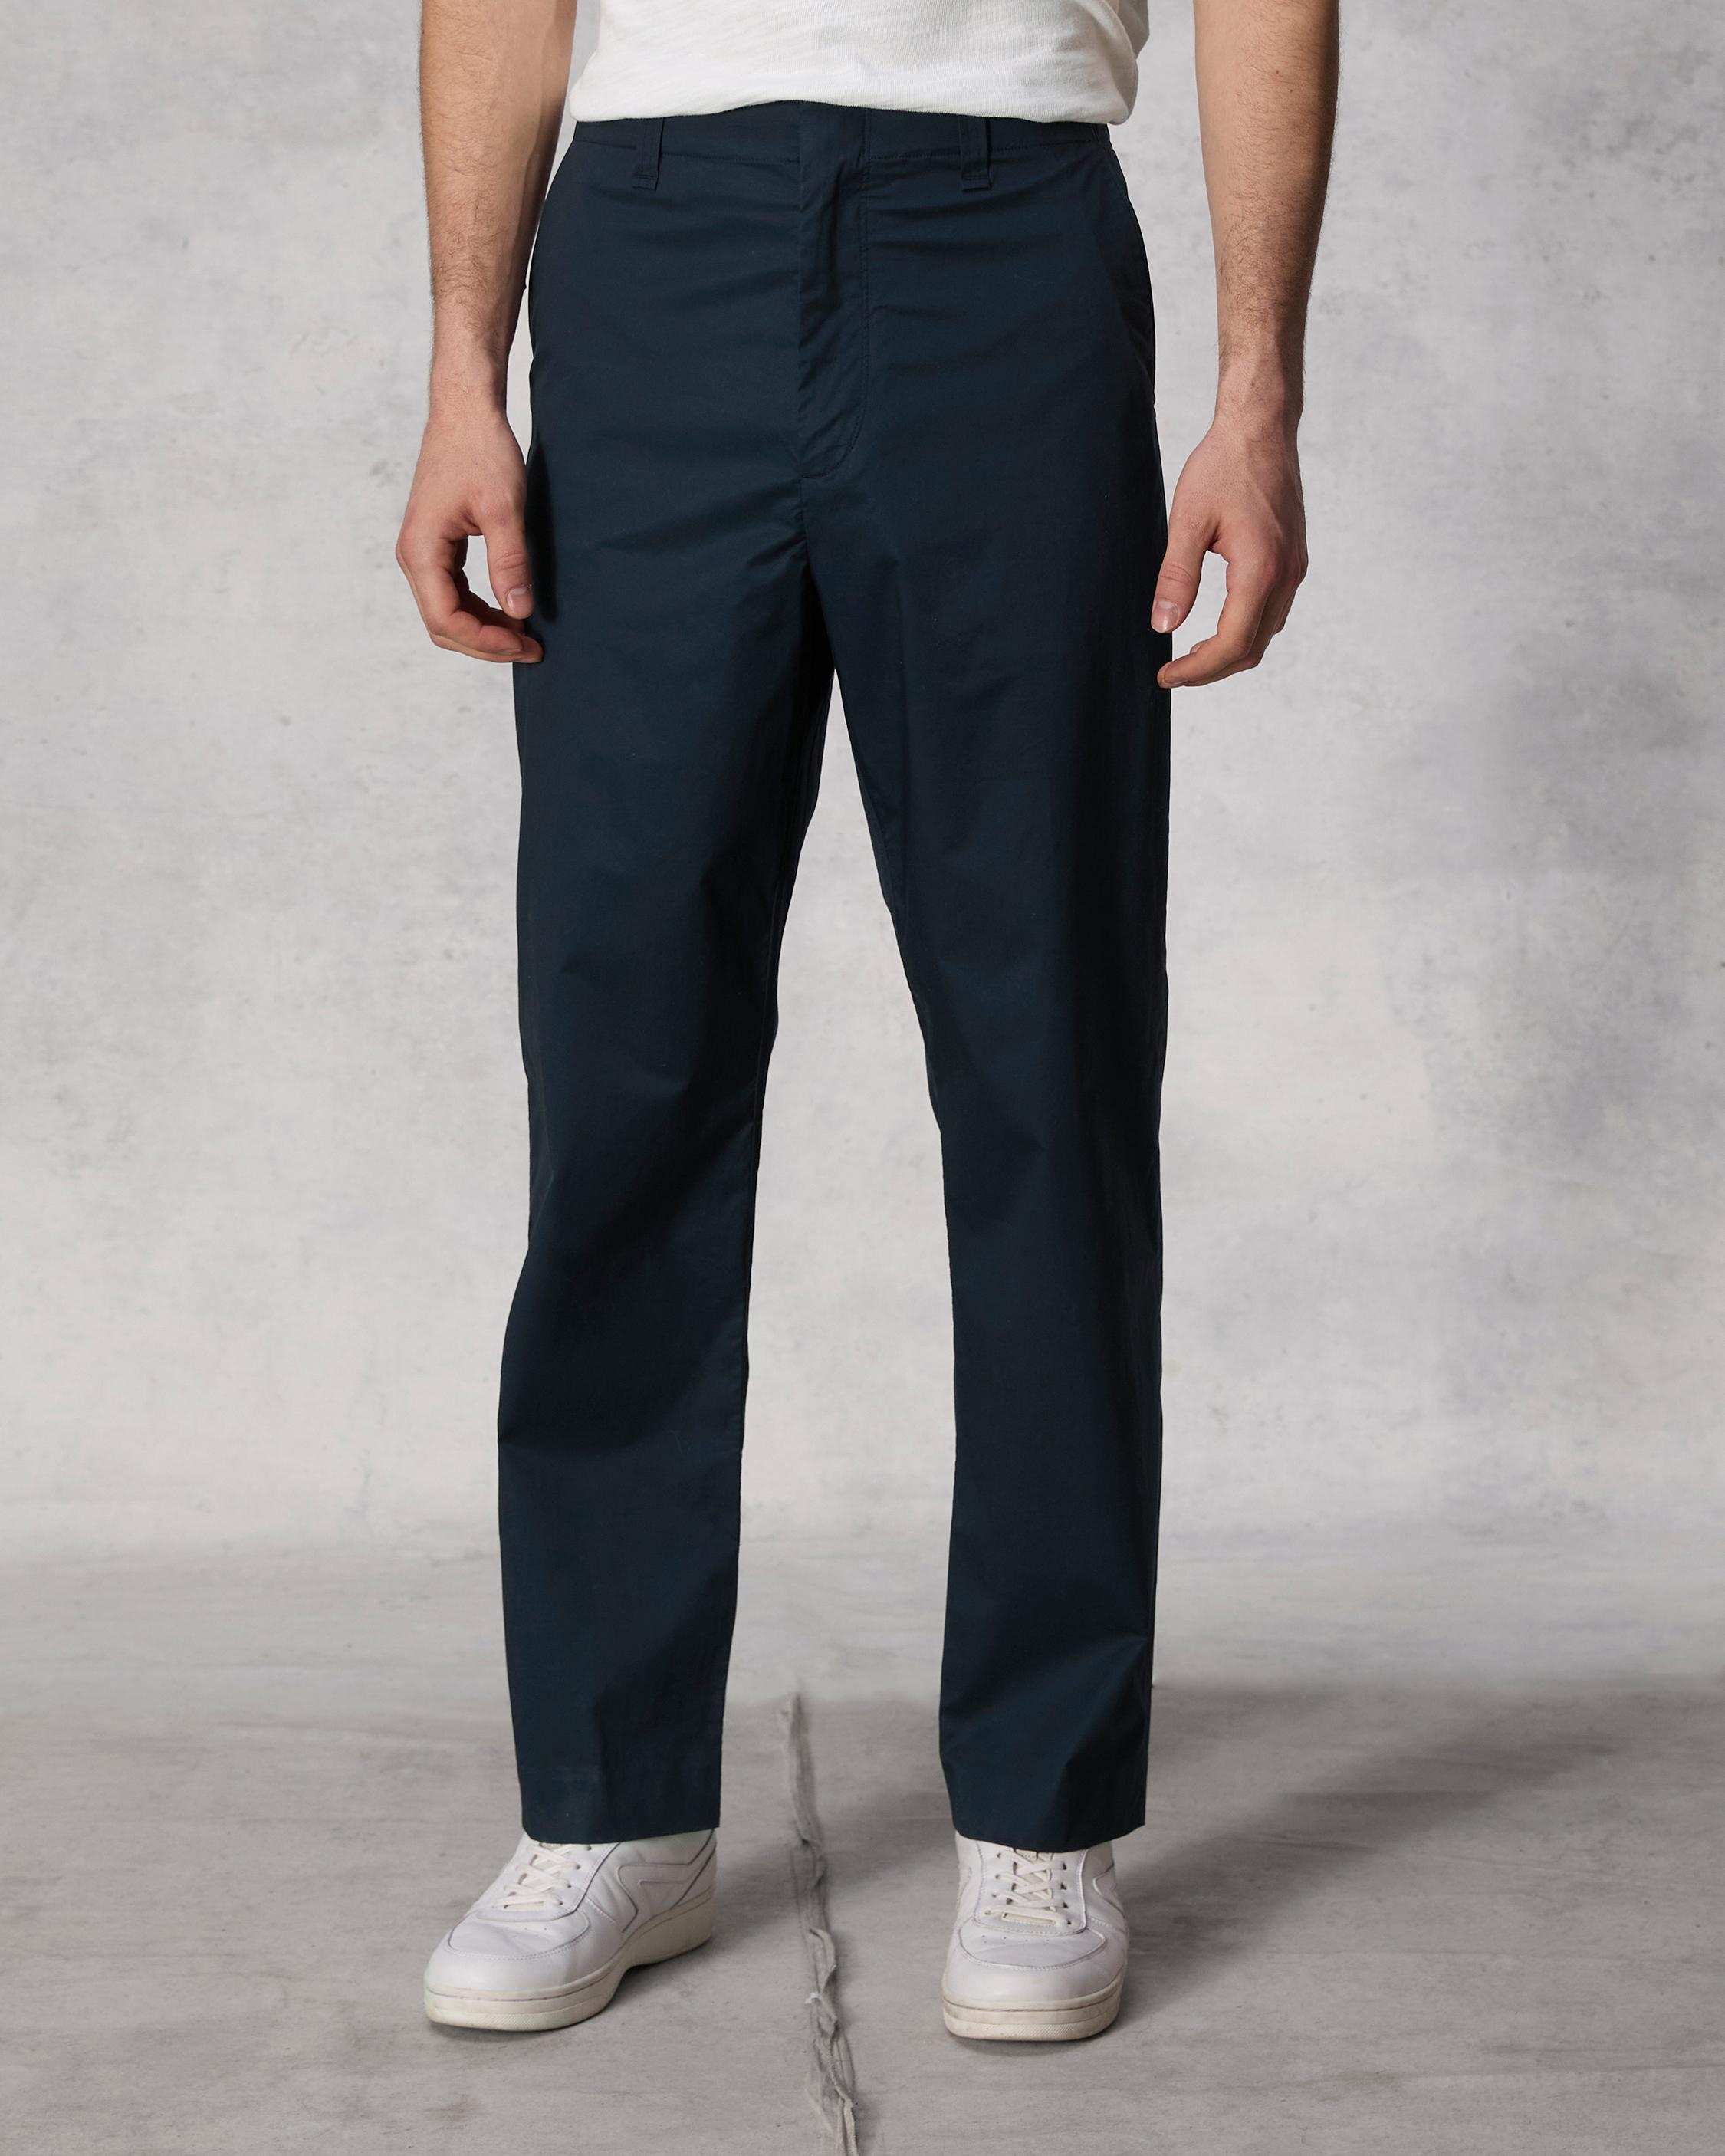 Bradford Cotton Poplin Pant
Relaxed Fit - 5